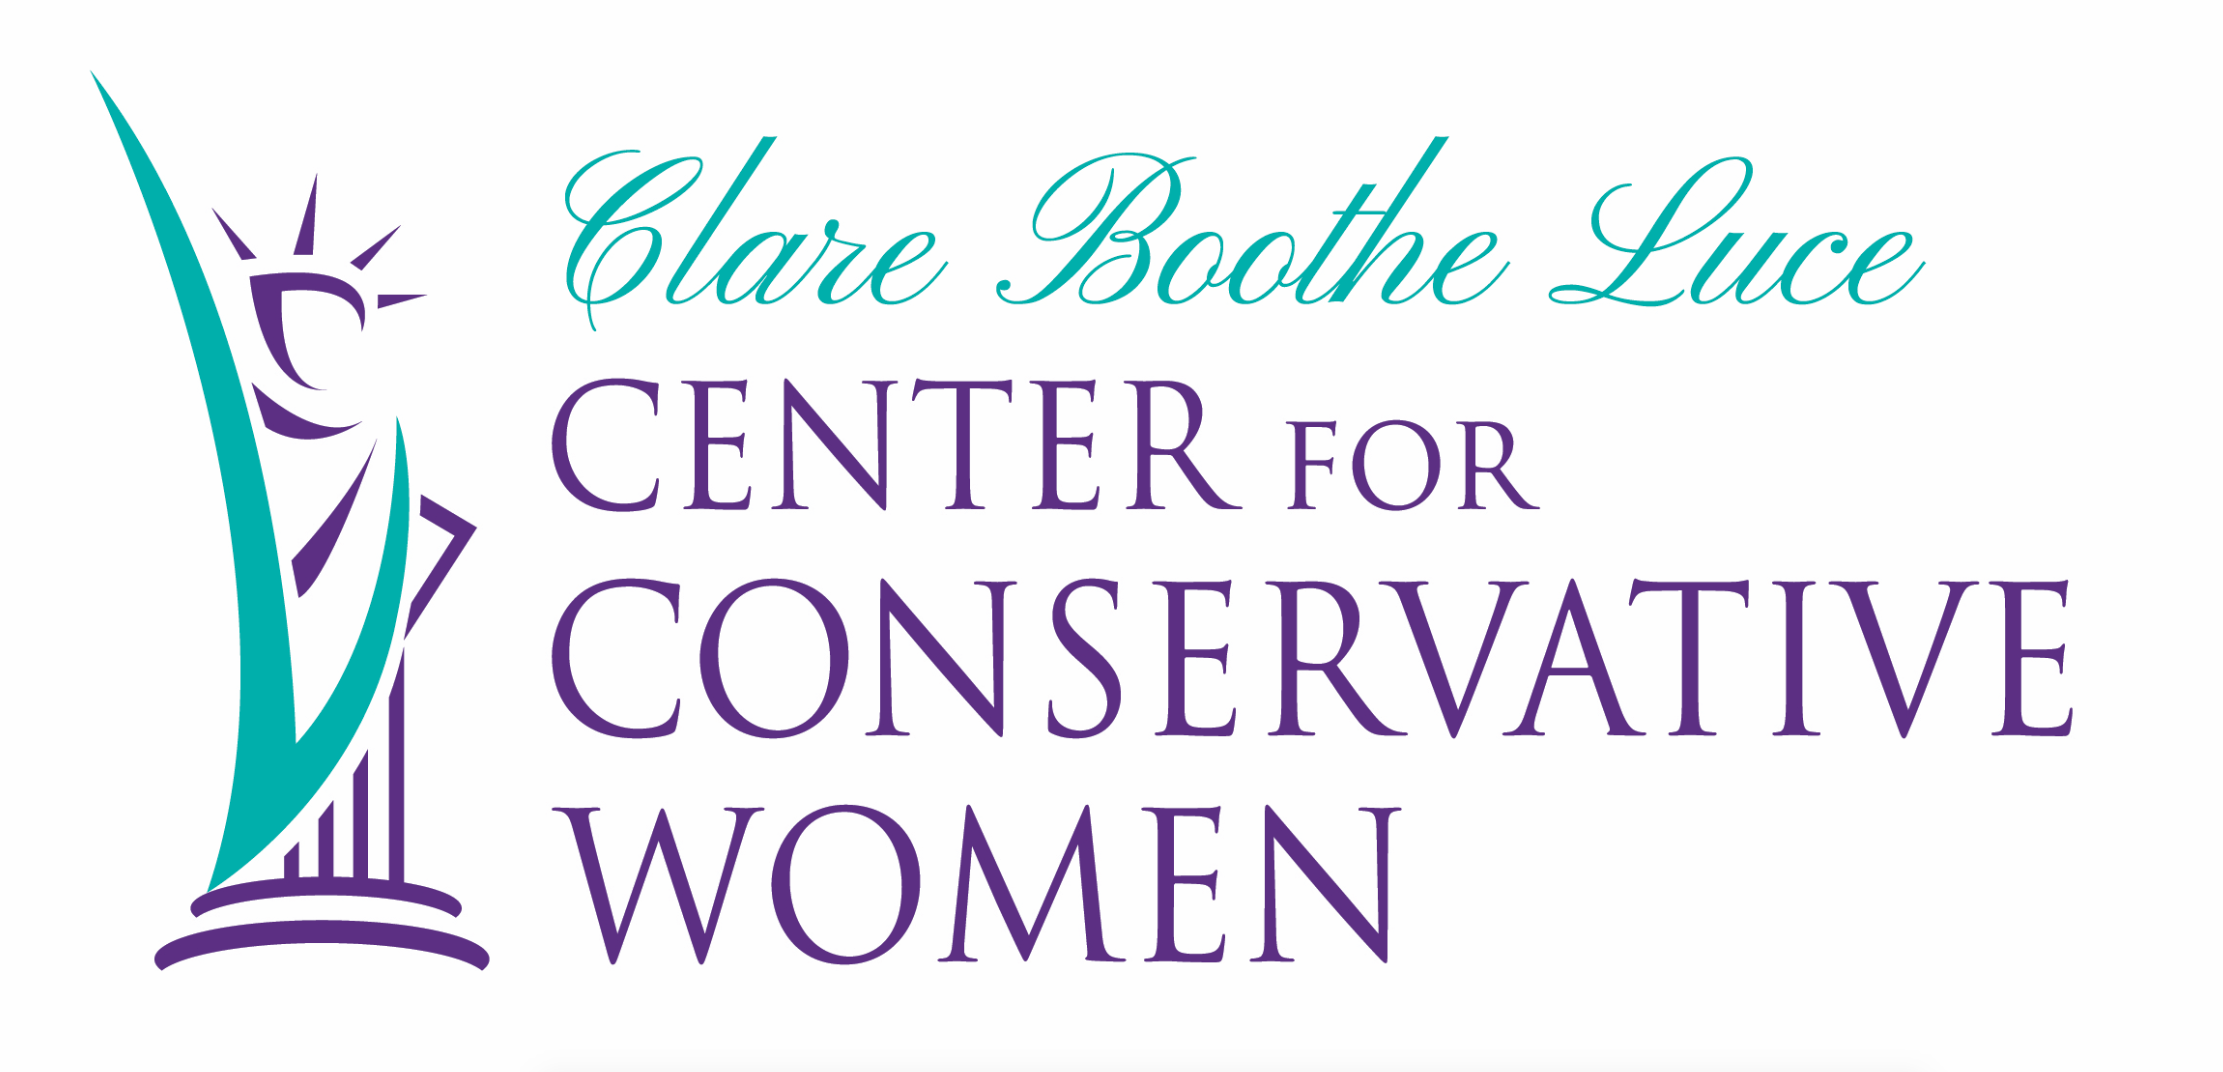 The Clare Boothe Luce Center for Conservative Women